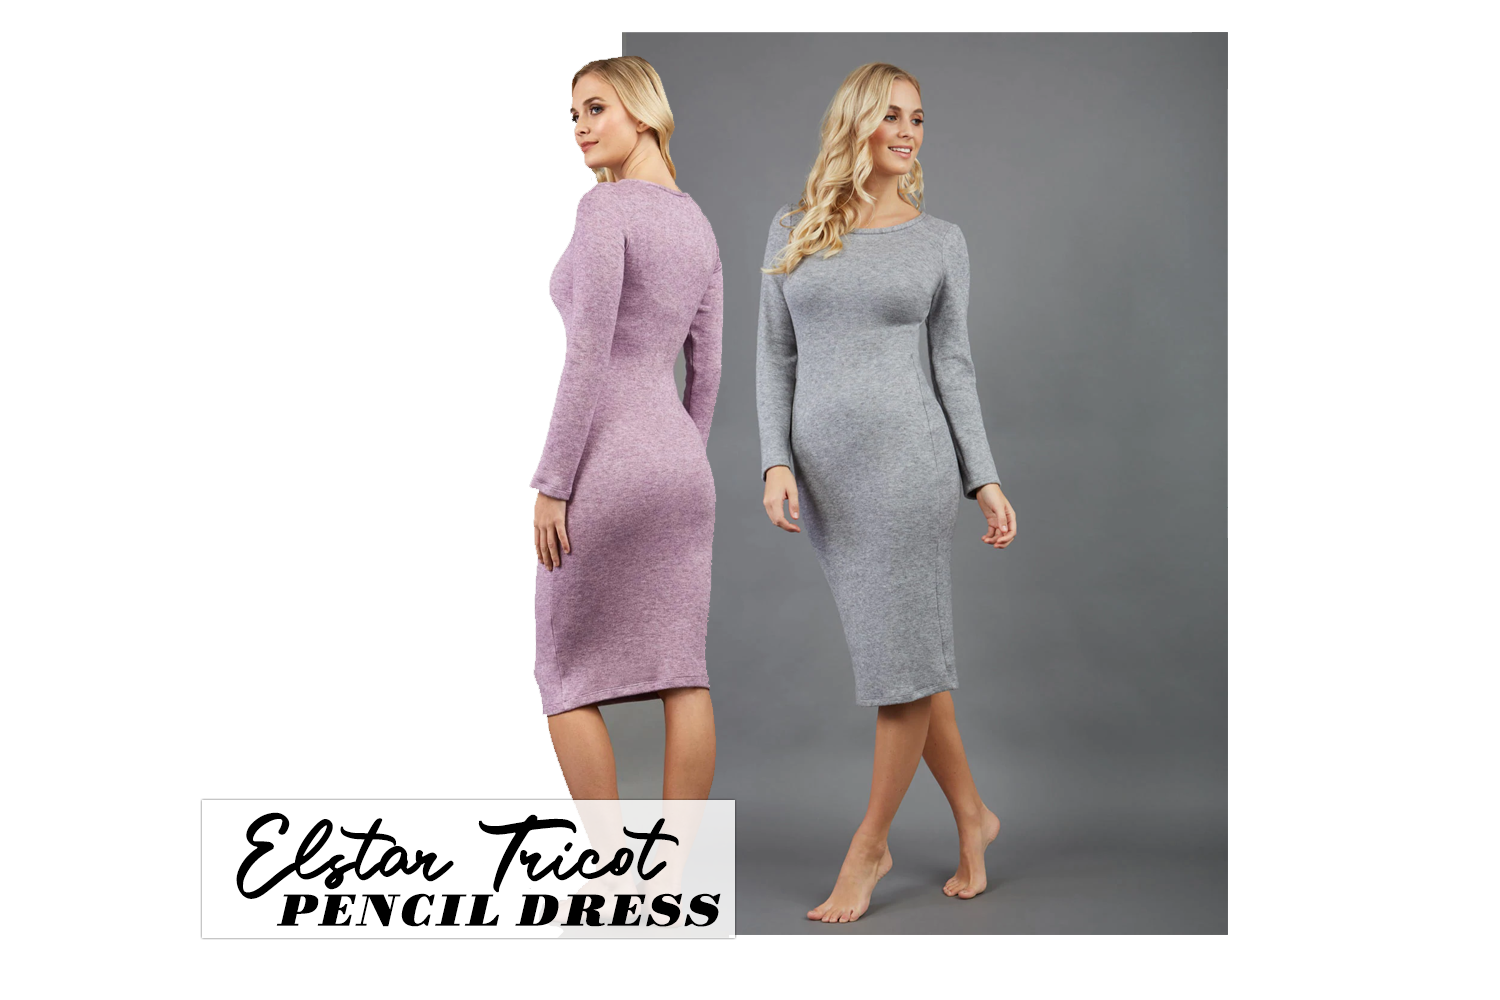 two images combined into one edit, of a model wearing the elstar dress coat in grey and lavender.